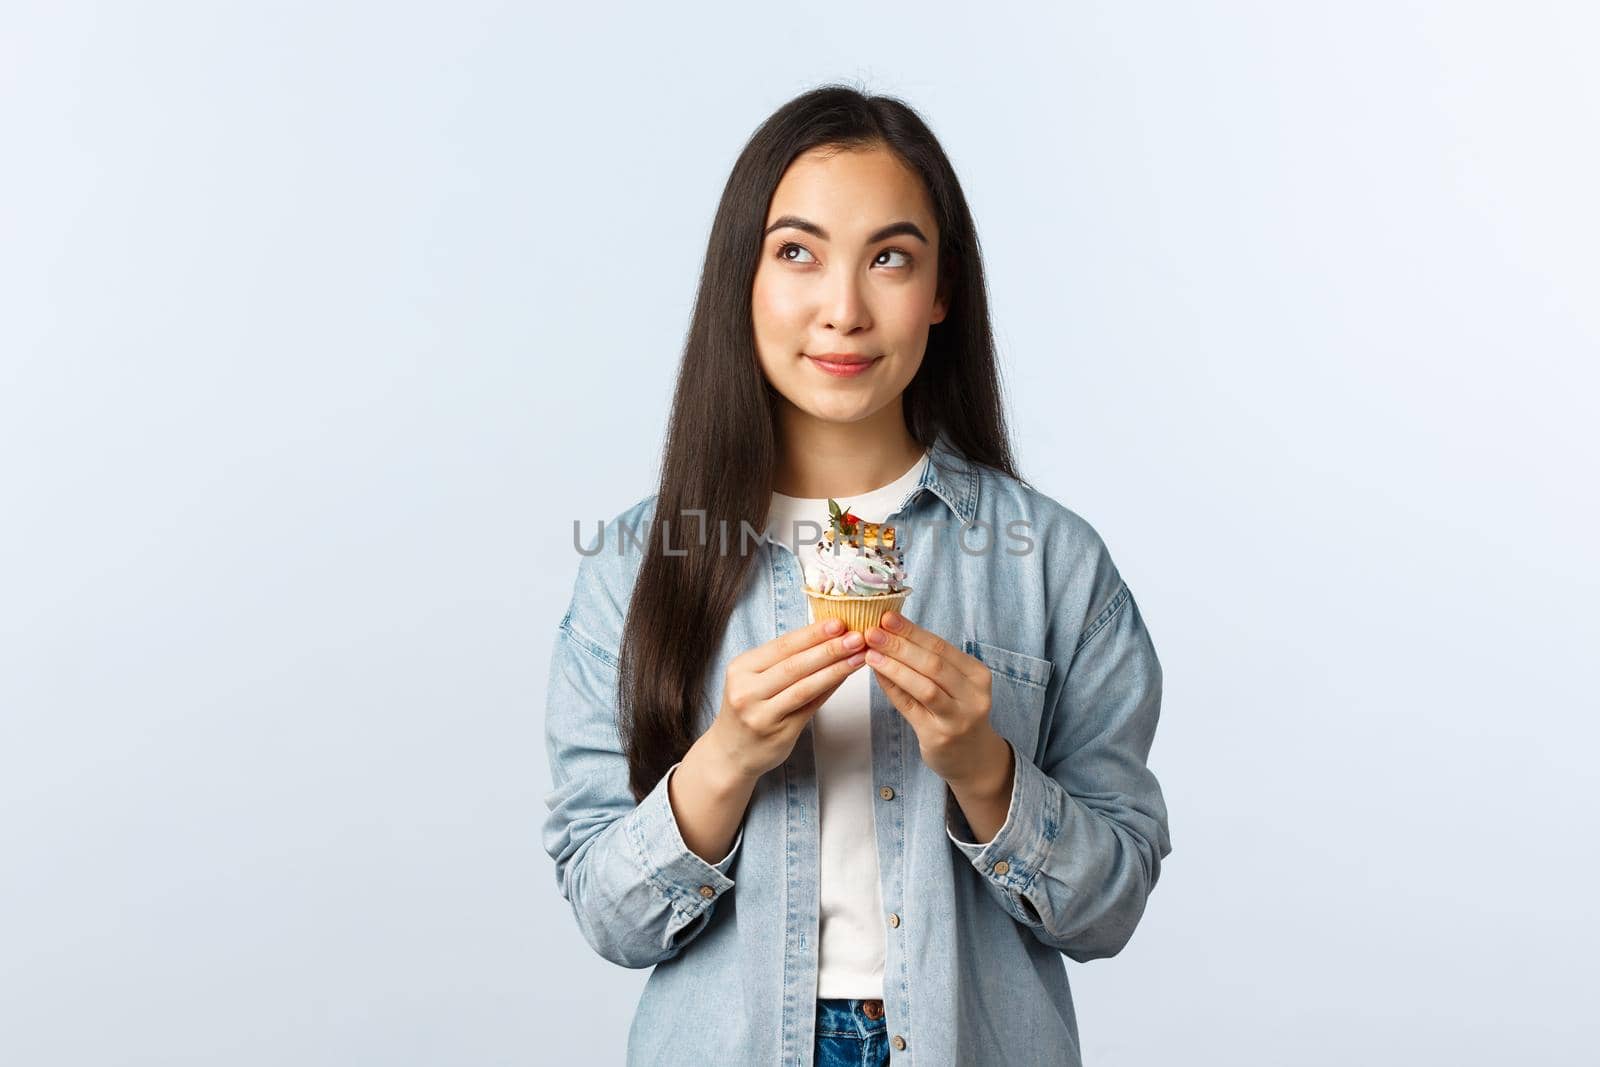 Social distancing lifestyle, covid-19 pandemic, celebrating holidays during coronavirus concept. Thoughtful cute asian girl deciding eat cupcake or note, look up thinking, holding delicious dessert by Benzoix